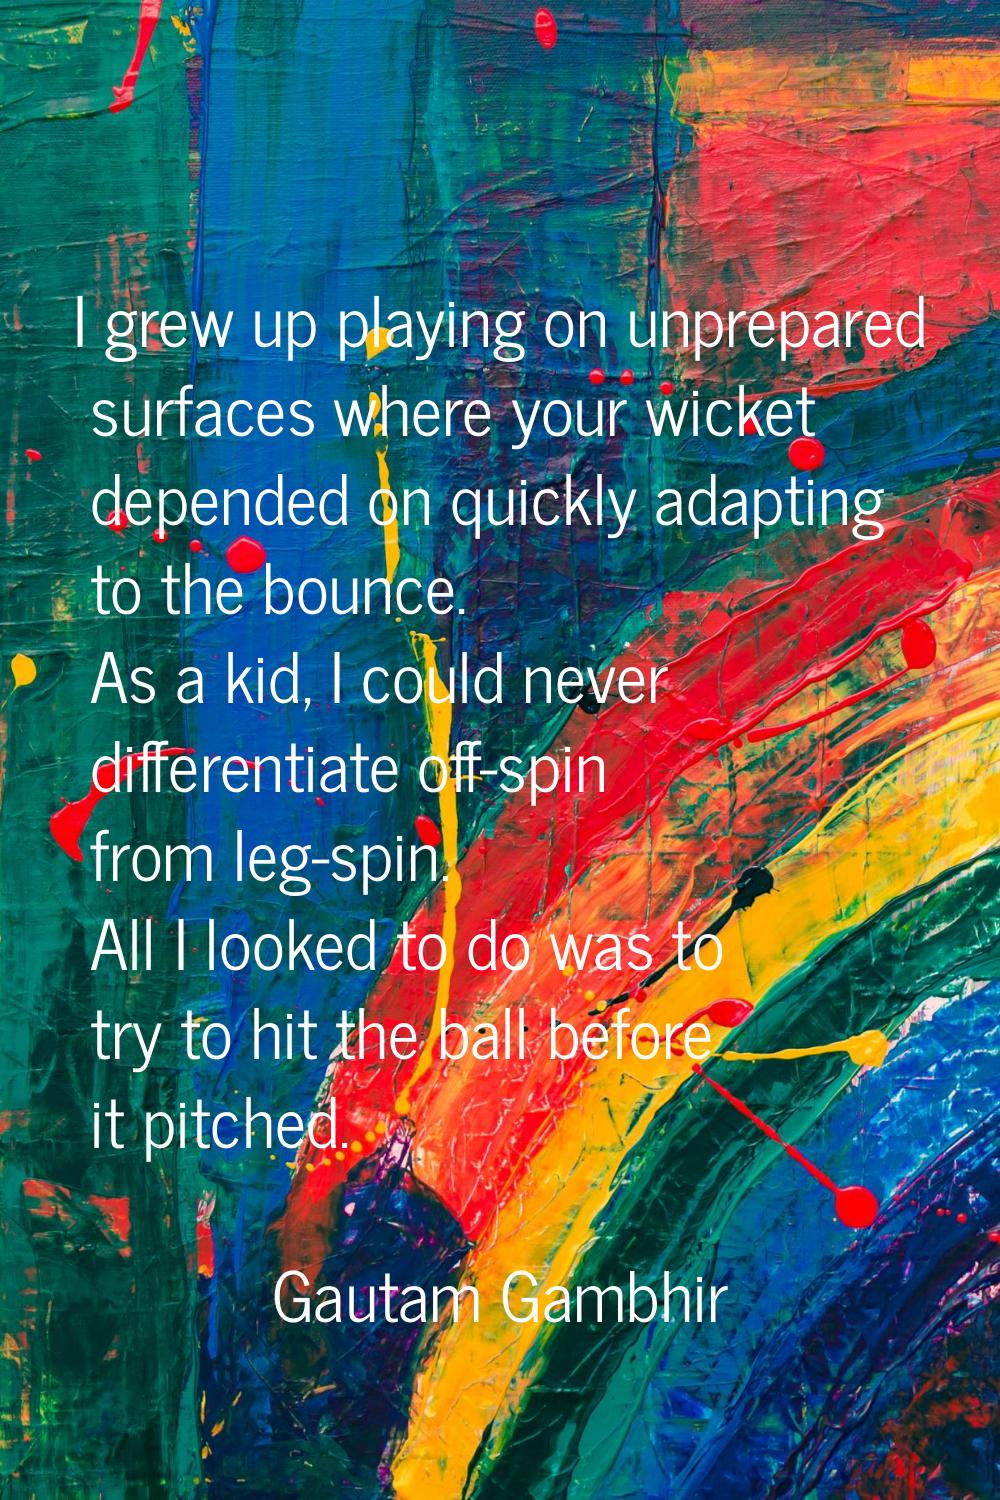 I grew up playing on unprepared surfaces where your wicket depended on quickly adapting to the boun